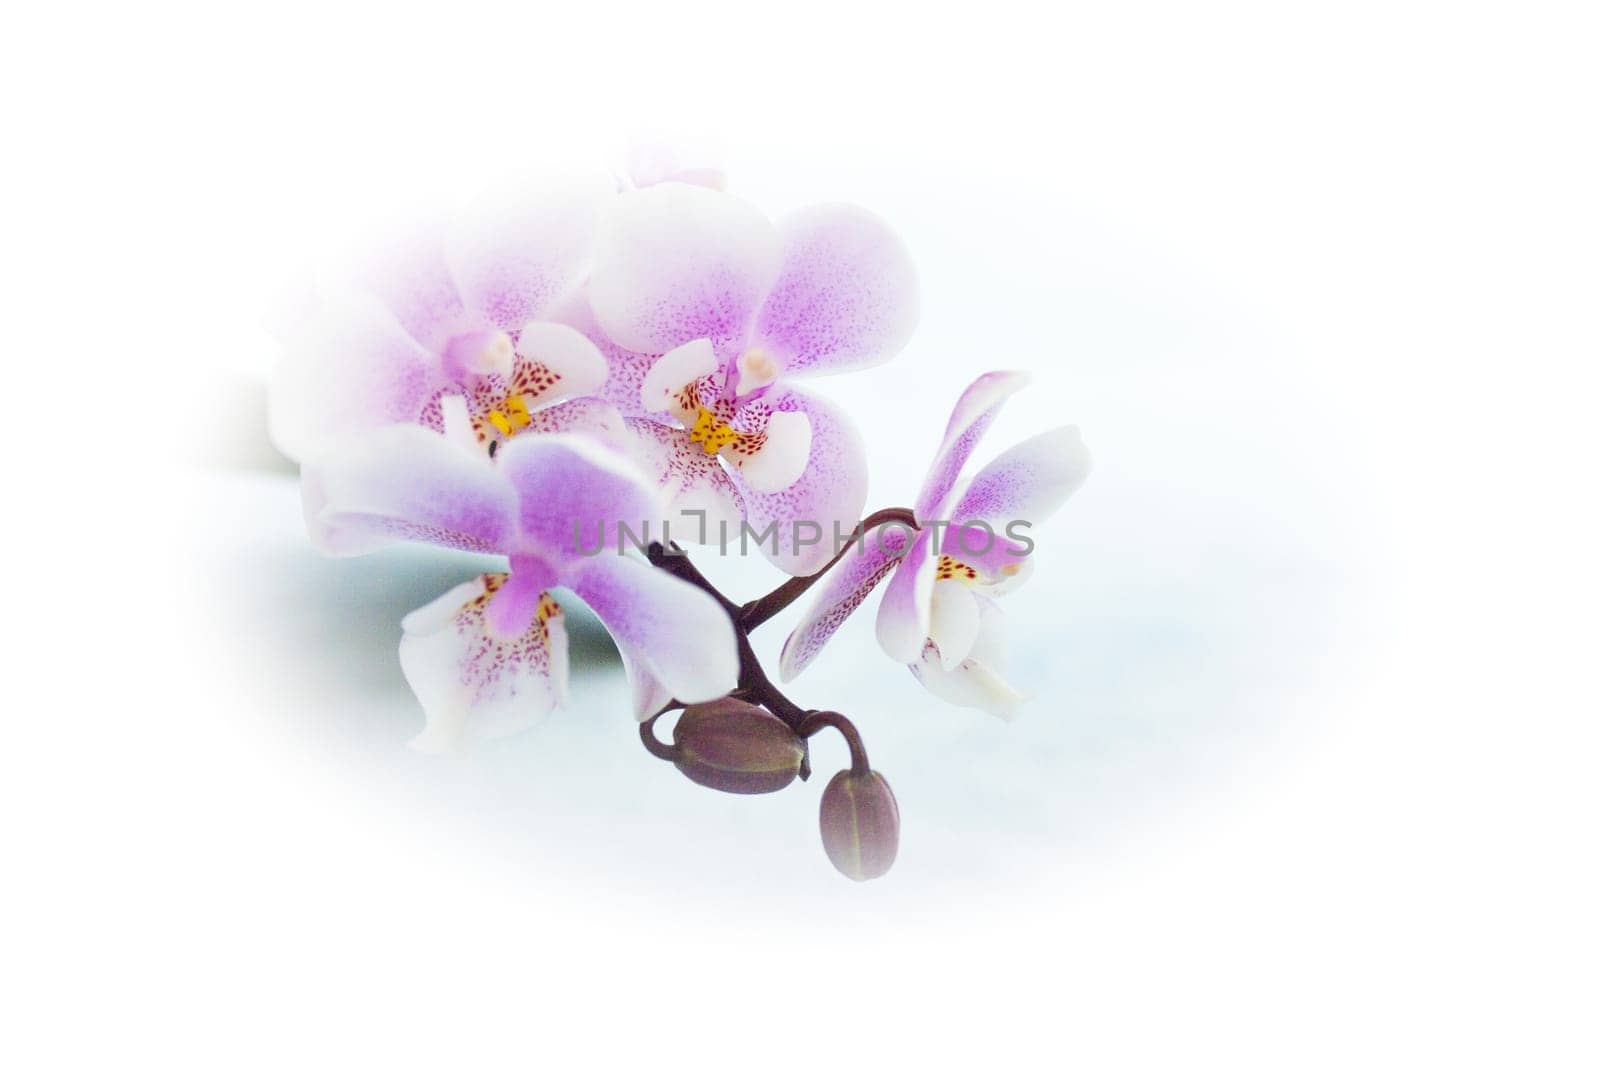 White and purple toy orchid flowers by GemaIbarra